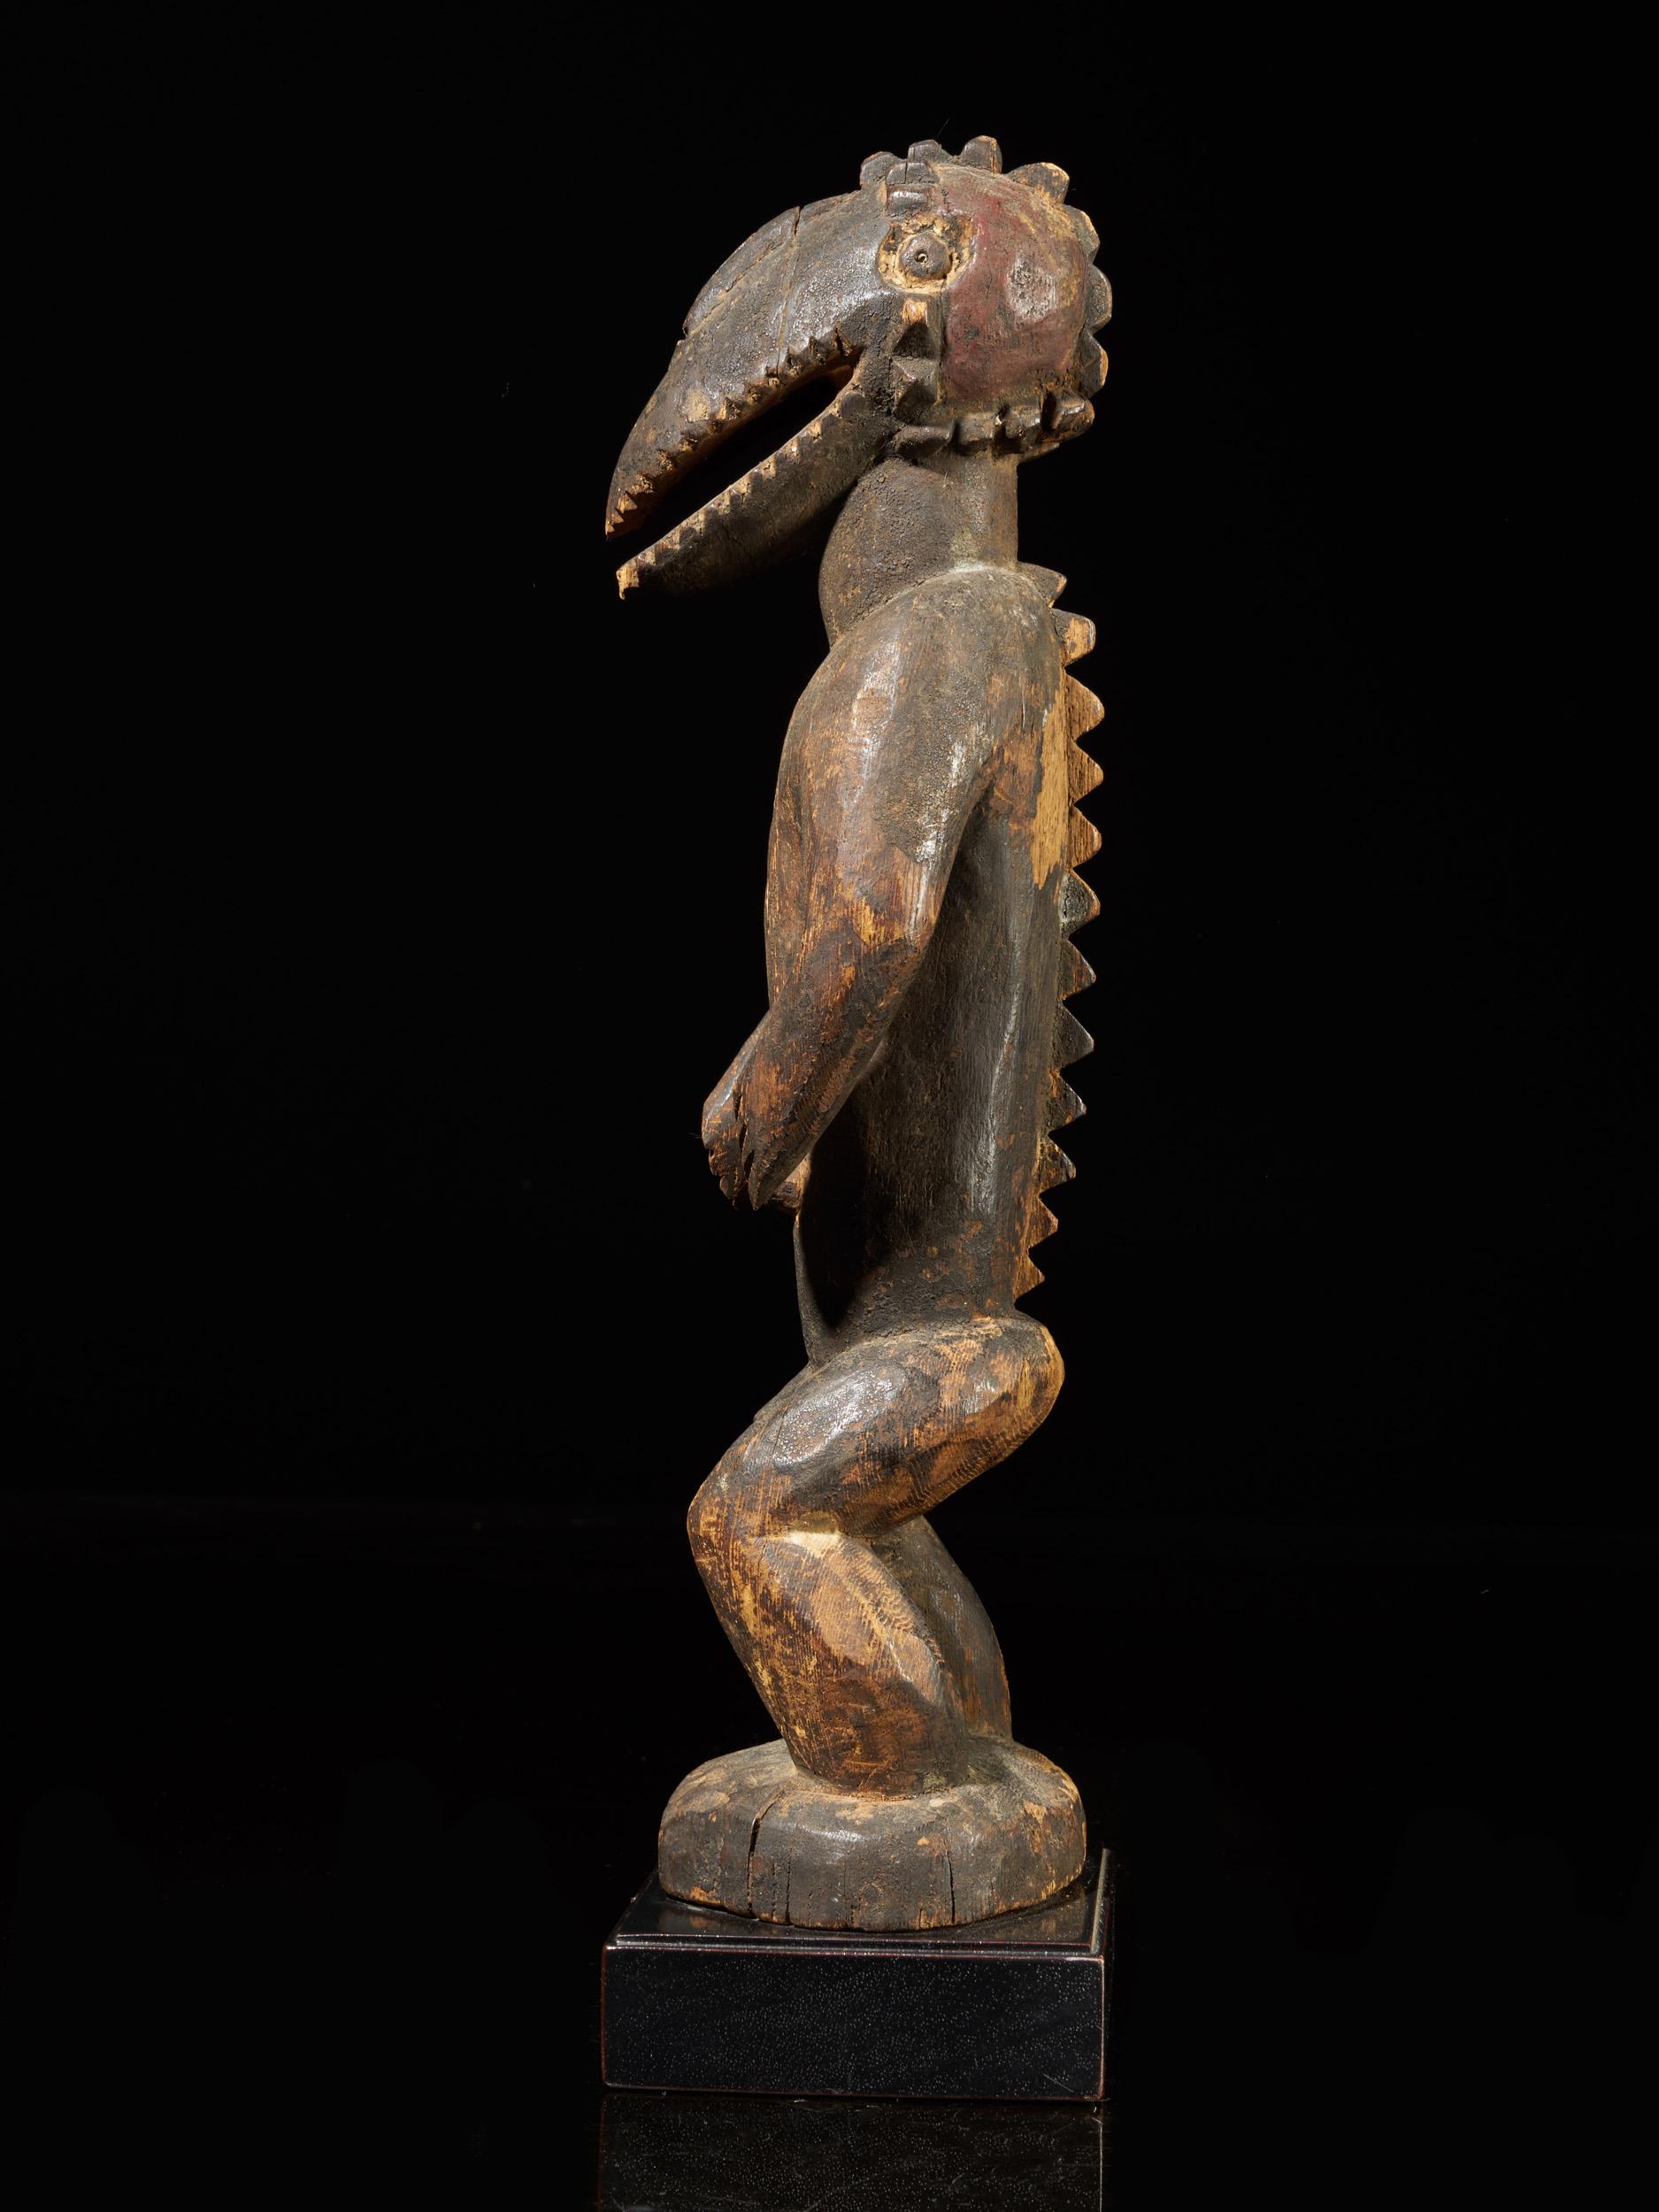 Nigerian Montol-Goemai Wooden Statue Combined with Gugwom-Like Head